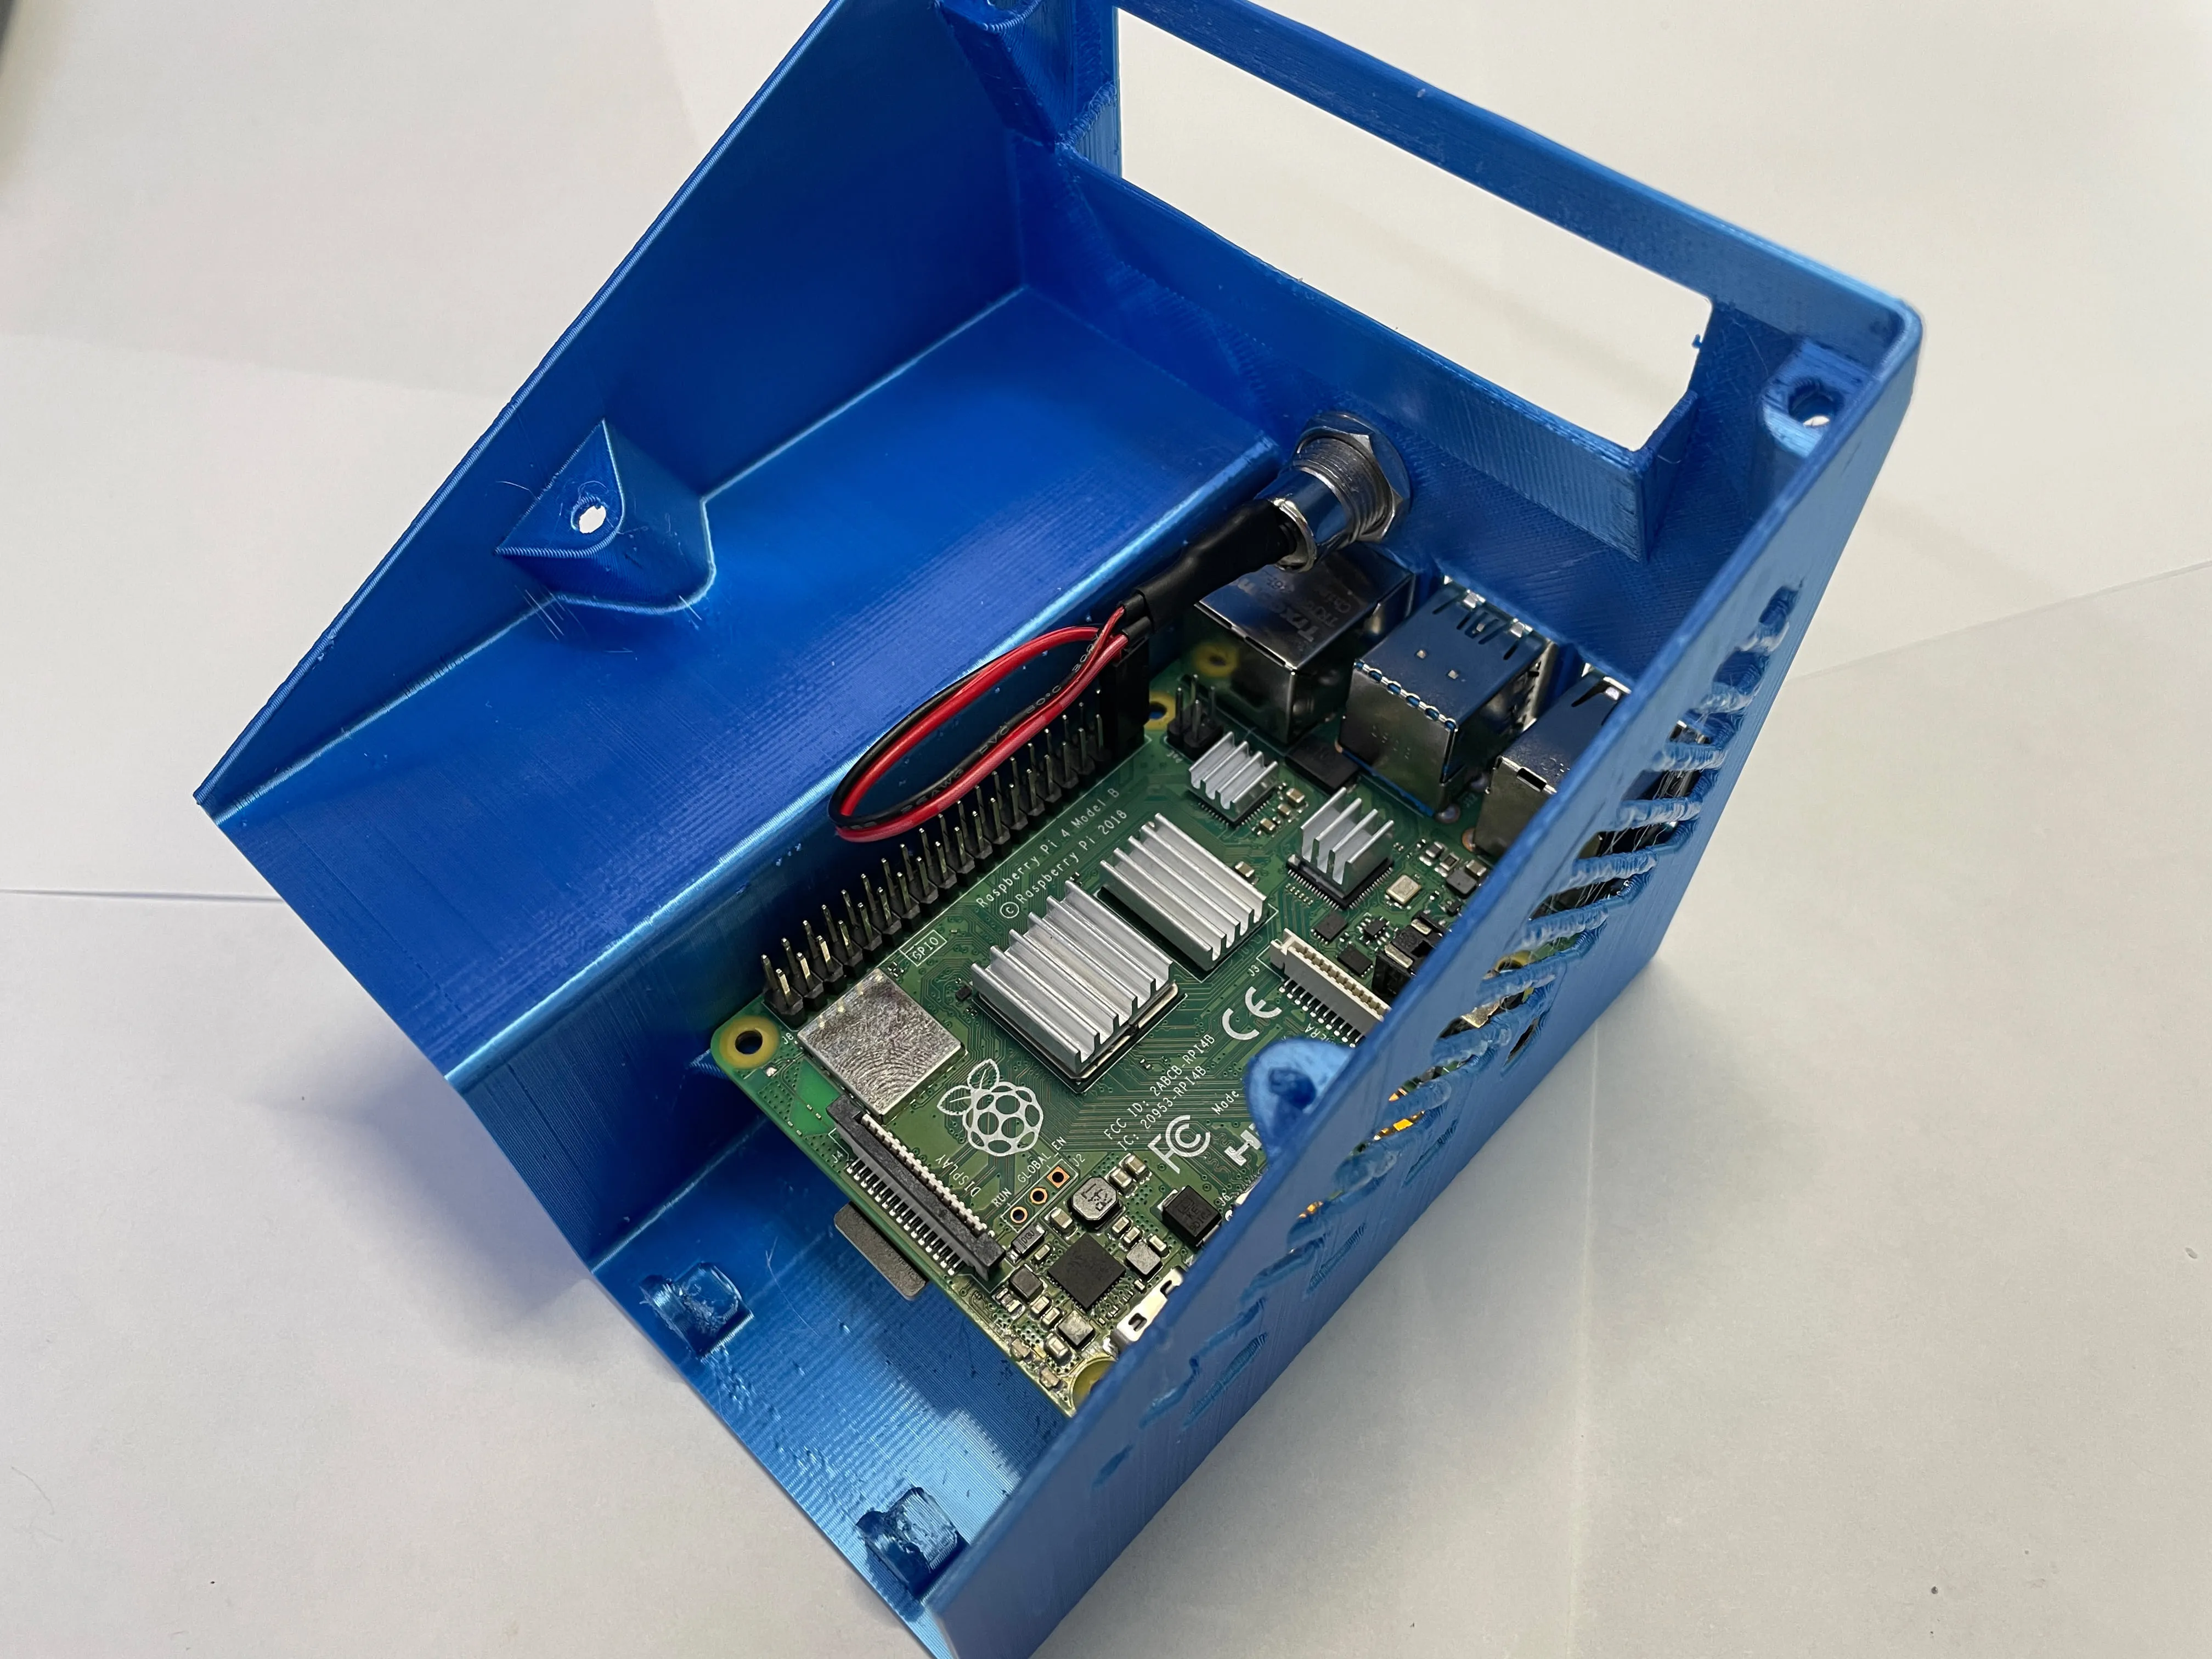 Top view of the Raspberry Pi 4 in the printed enclosure and the female barrel connector installed